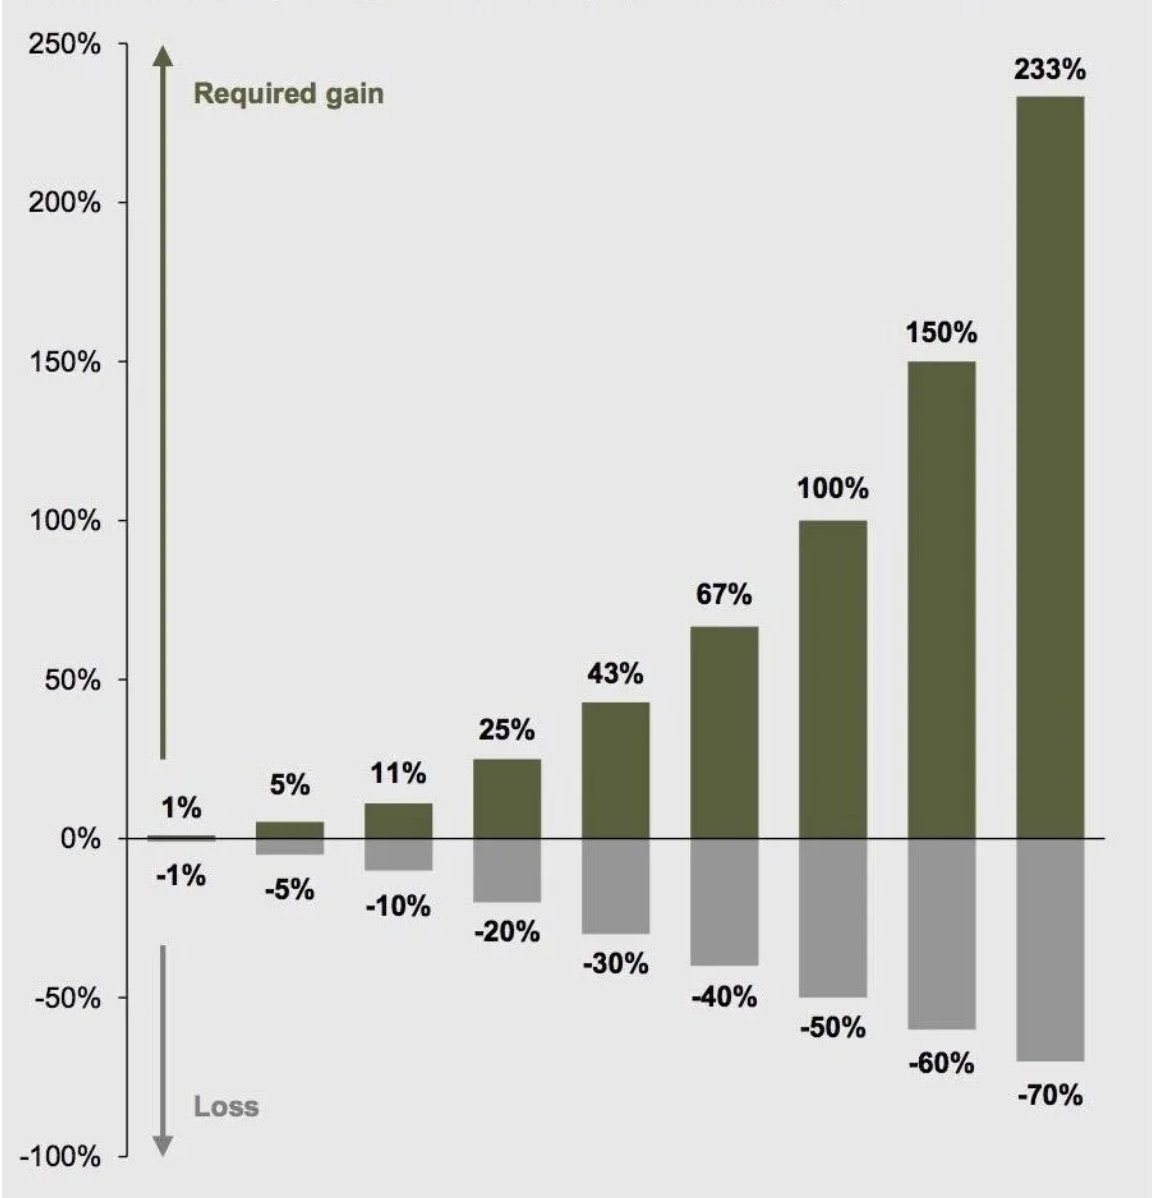  Green (required gain) and gray (loss) bar graph, illustrating how one needs a 100% gain to recover from a 50% loss in the stock markets